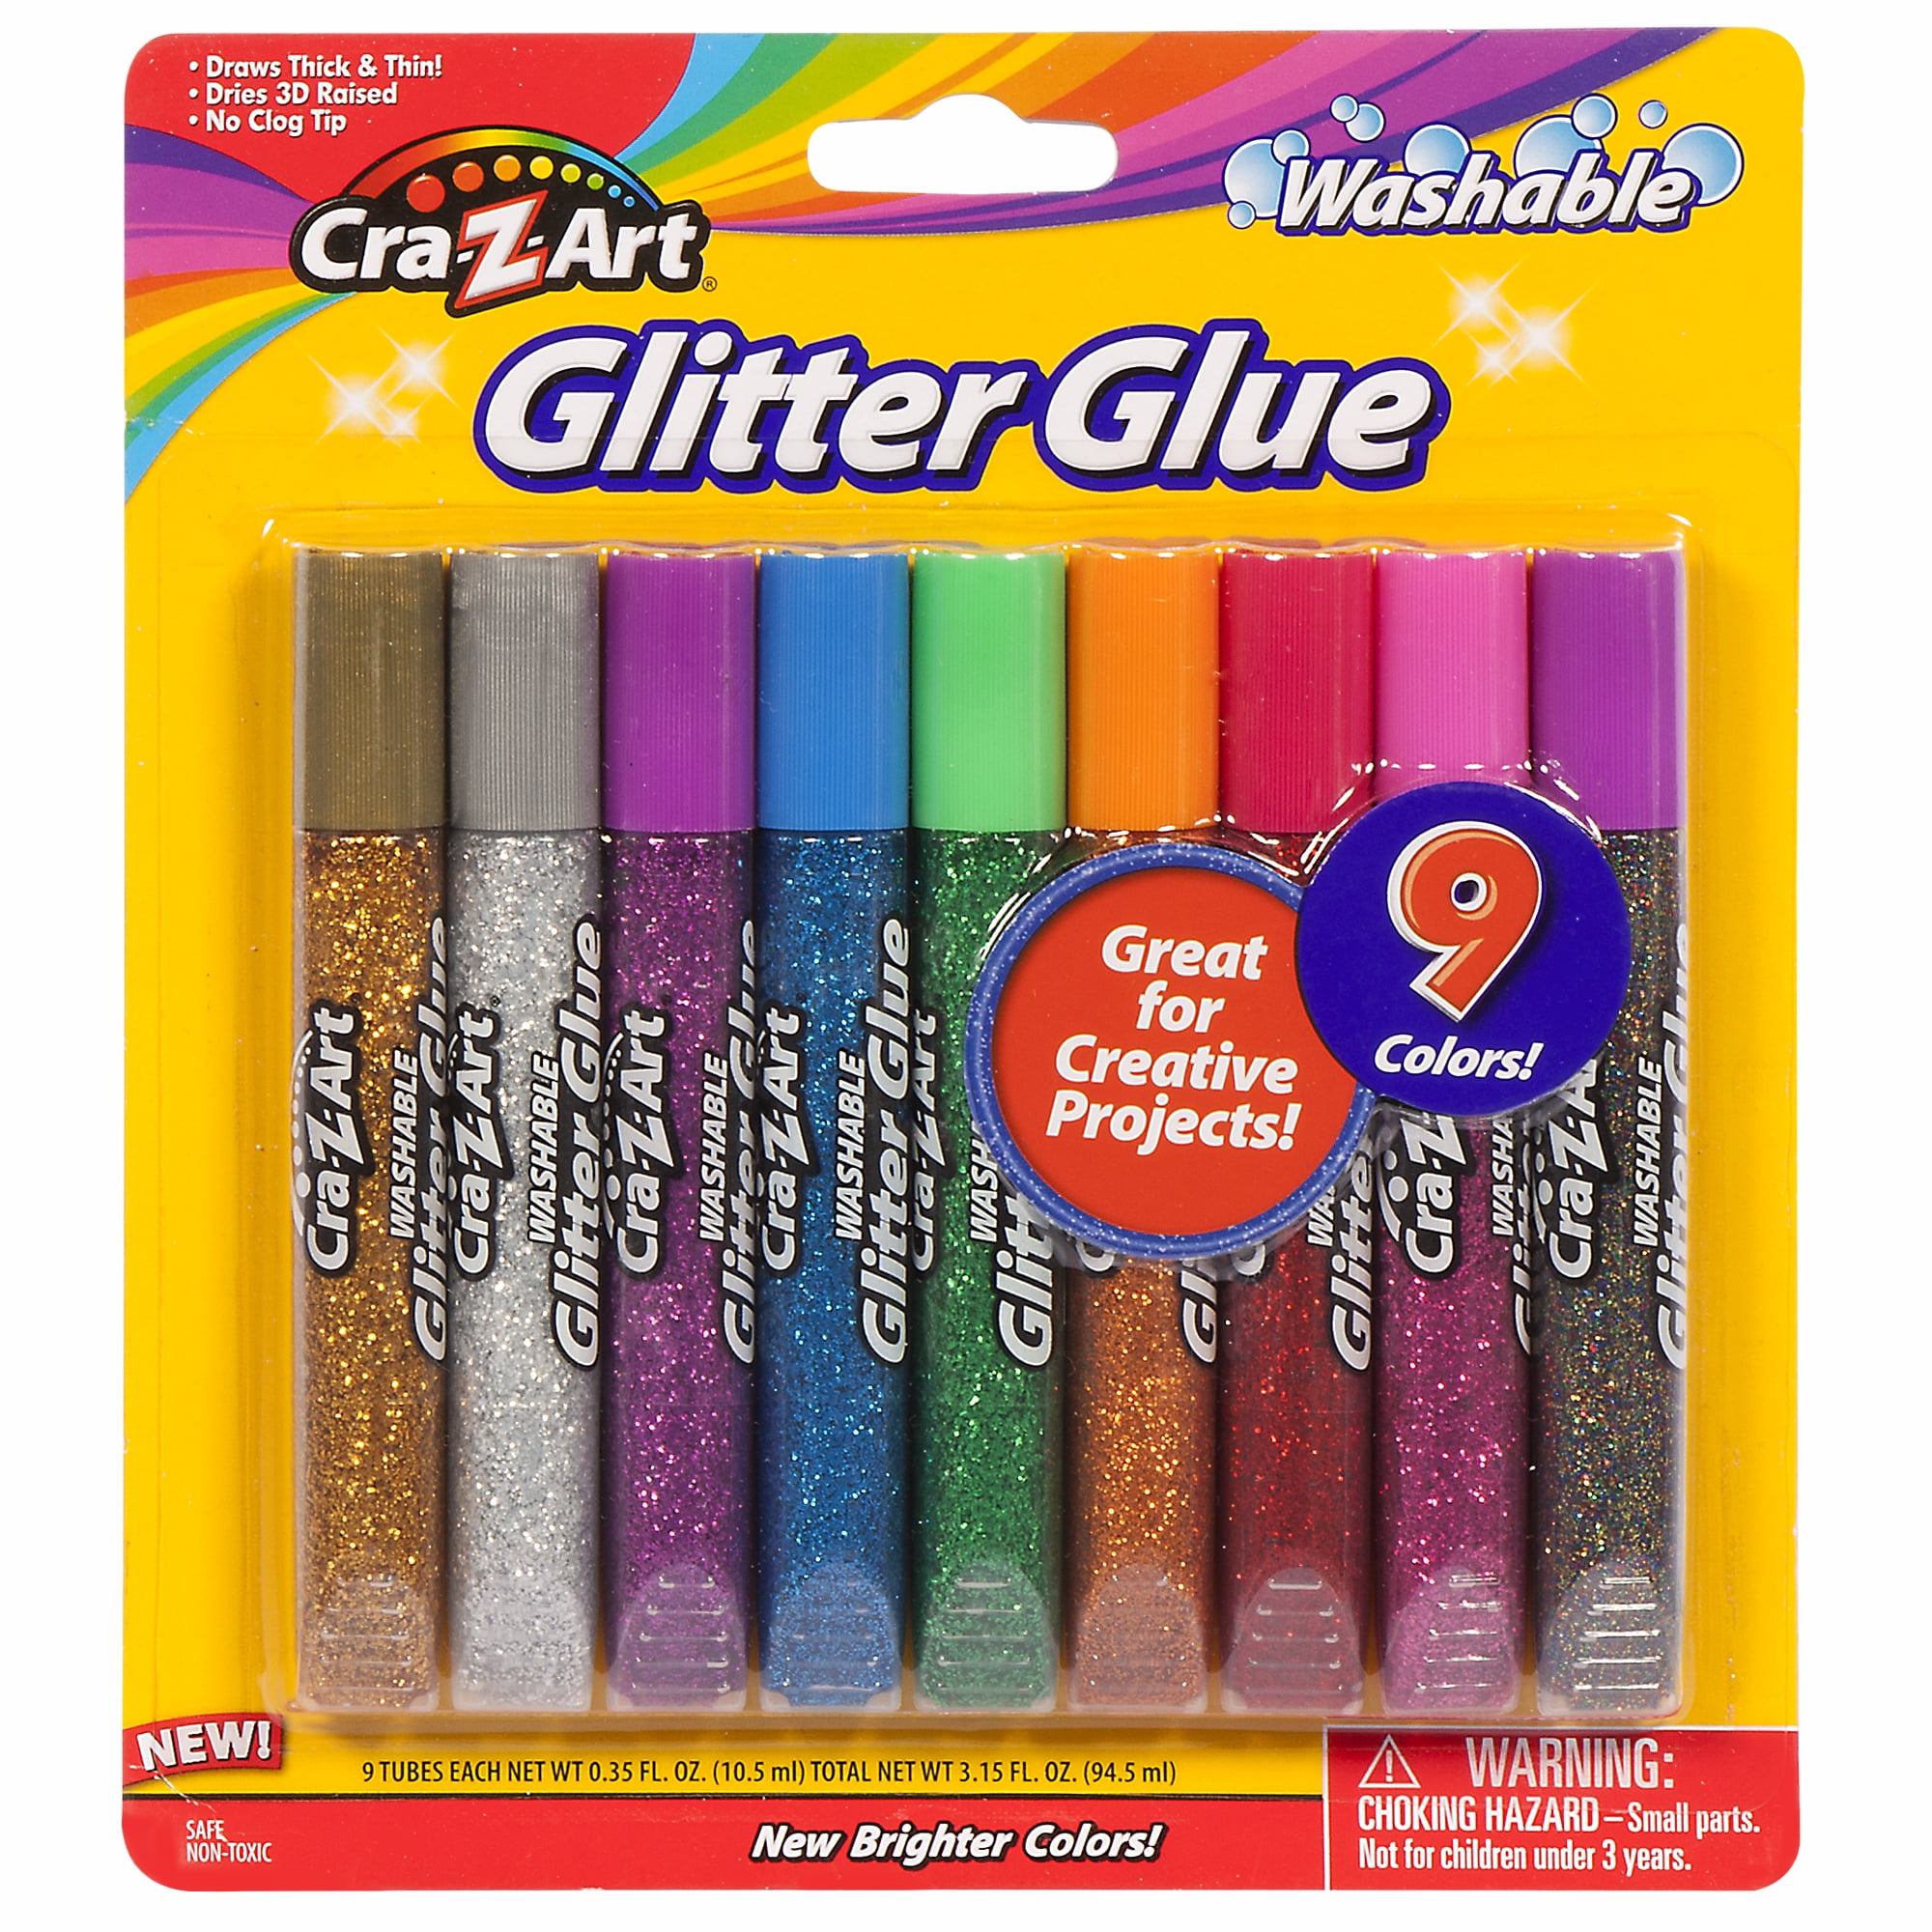 Glitter Glue for Crafts in Bright Classic Colors: Silver, Red, Green, Blue,  Purple & Gold Glitter Glue Washable & Non-Toxic Used for Gluing, Drawing